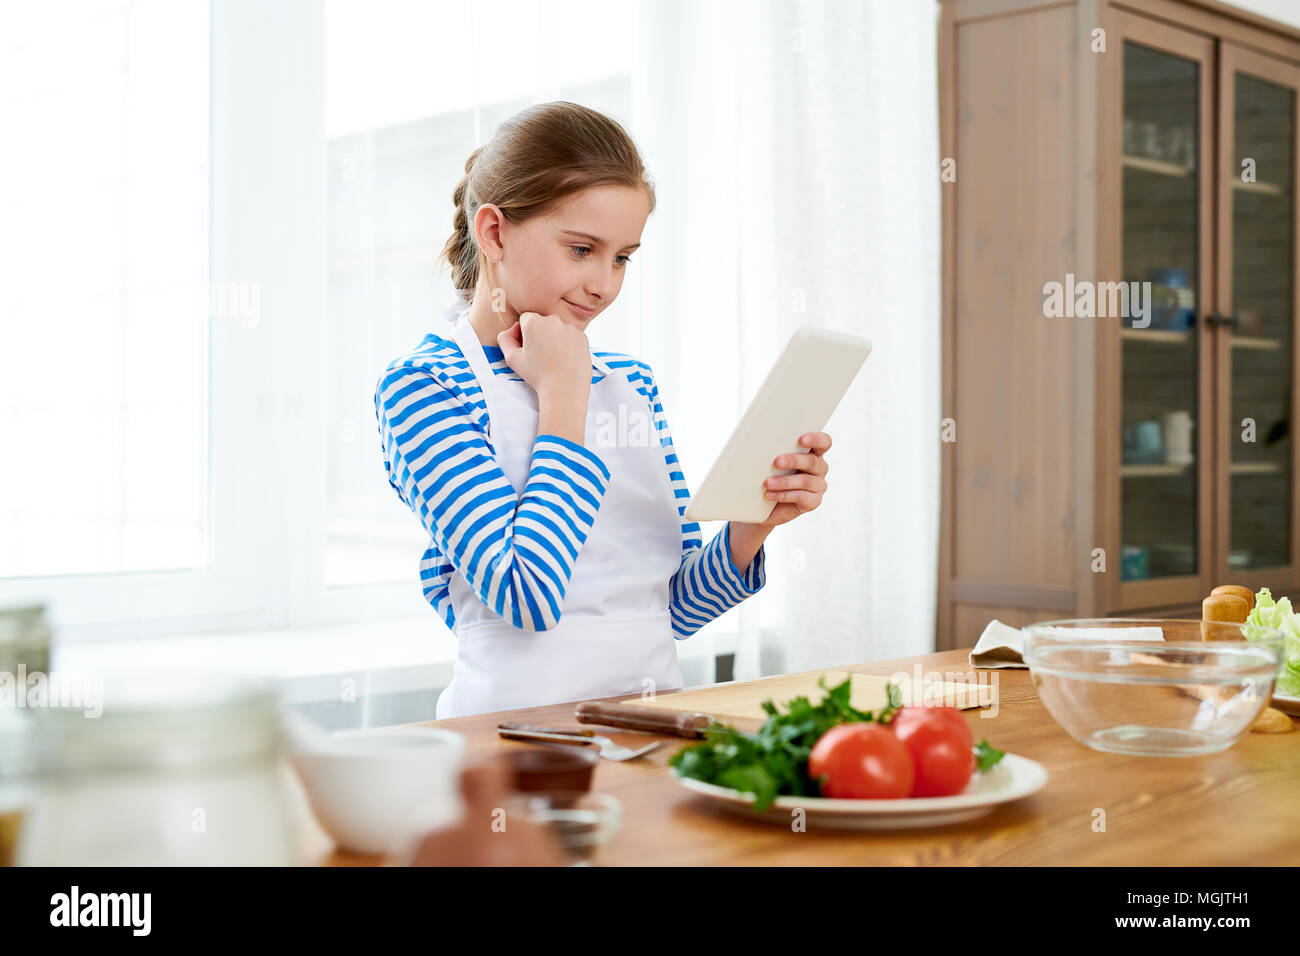 Curious little girl wrapped up in reading recipe with help of digital tablet while standing at wooden kitchen table in order to make surprise for Moth Stock Photo